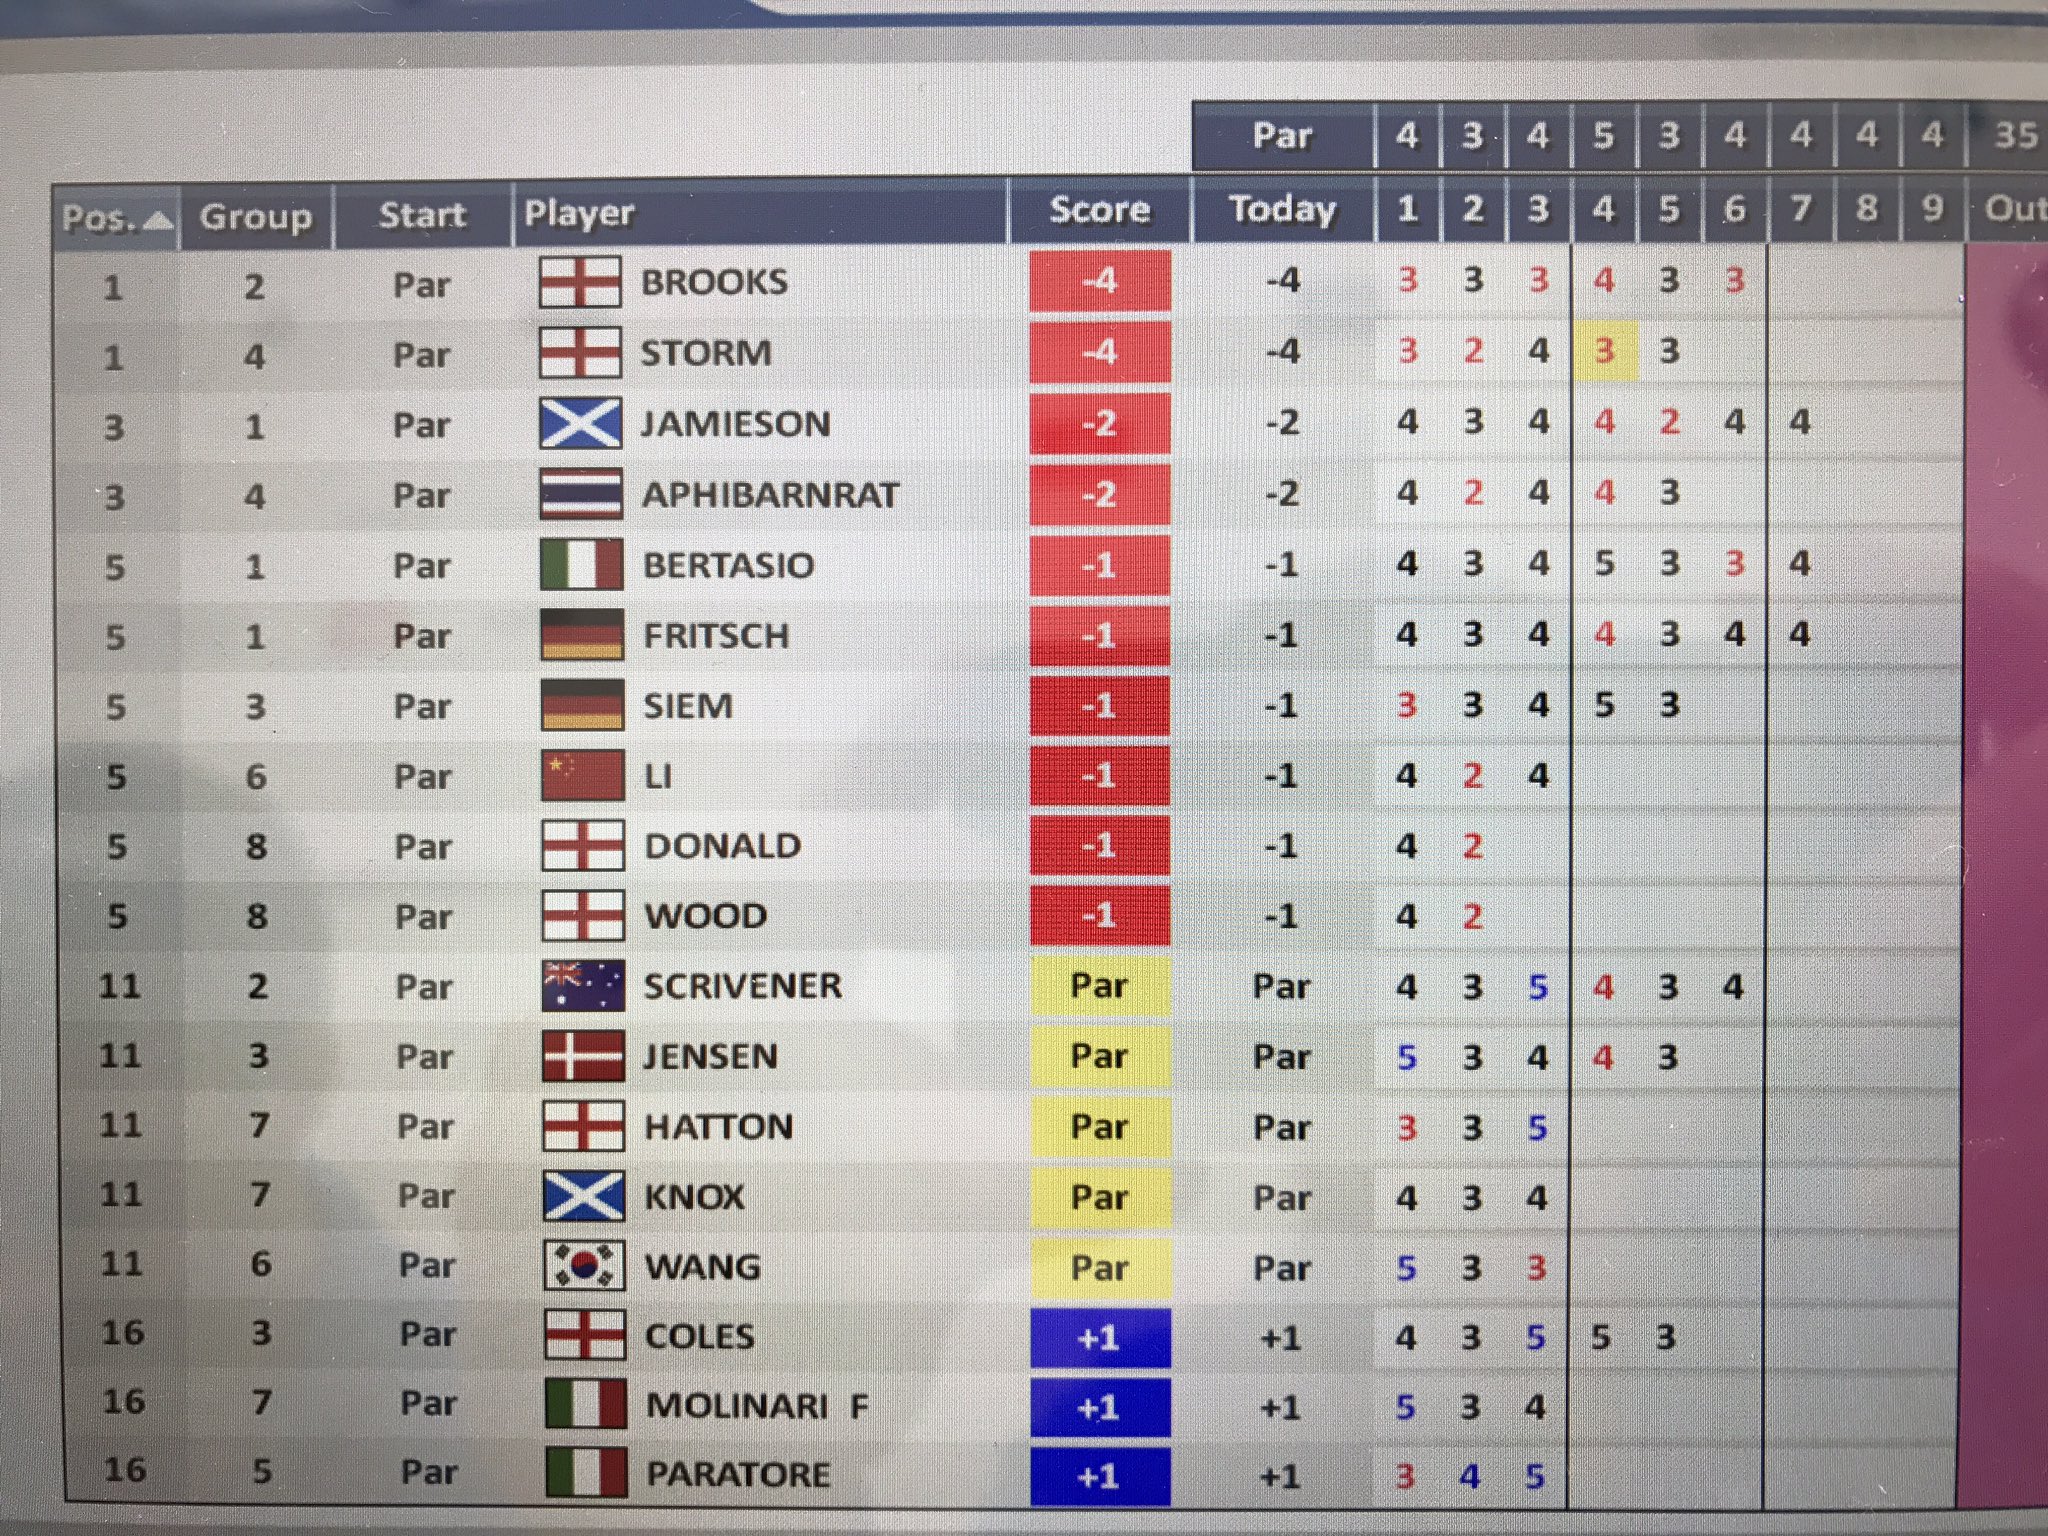 The European Tour on Twitter: "Current leaderboard update… - European Tour Leaderboard